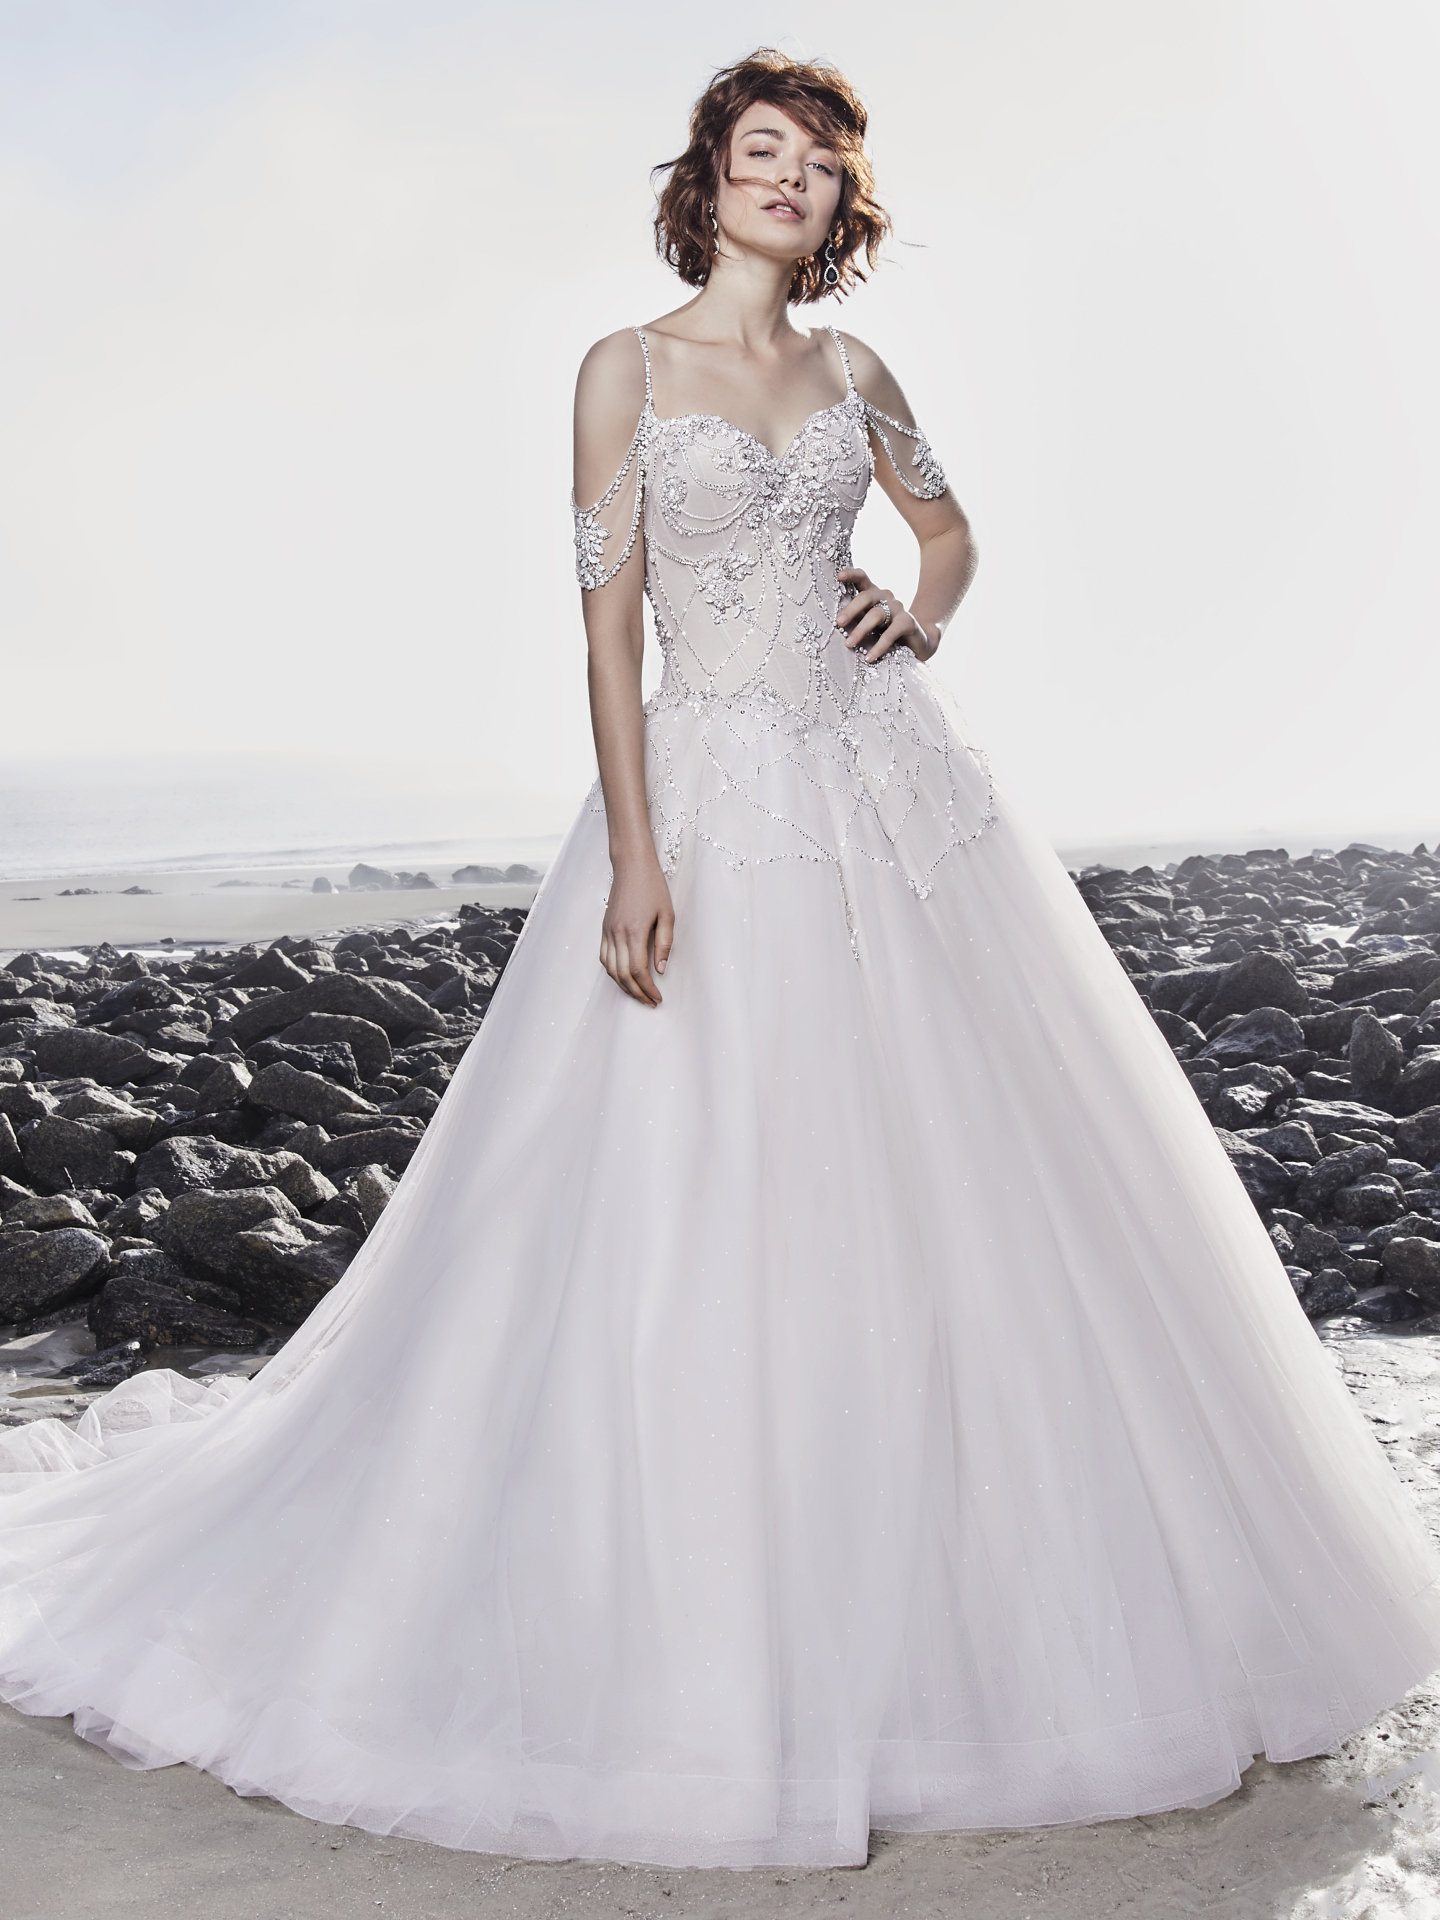 The Latest Glitzy, Red-Carpet-Ready Styles from Sottero and Midgley - Boston